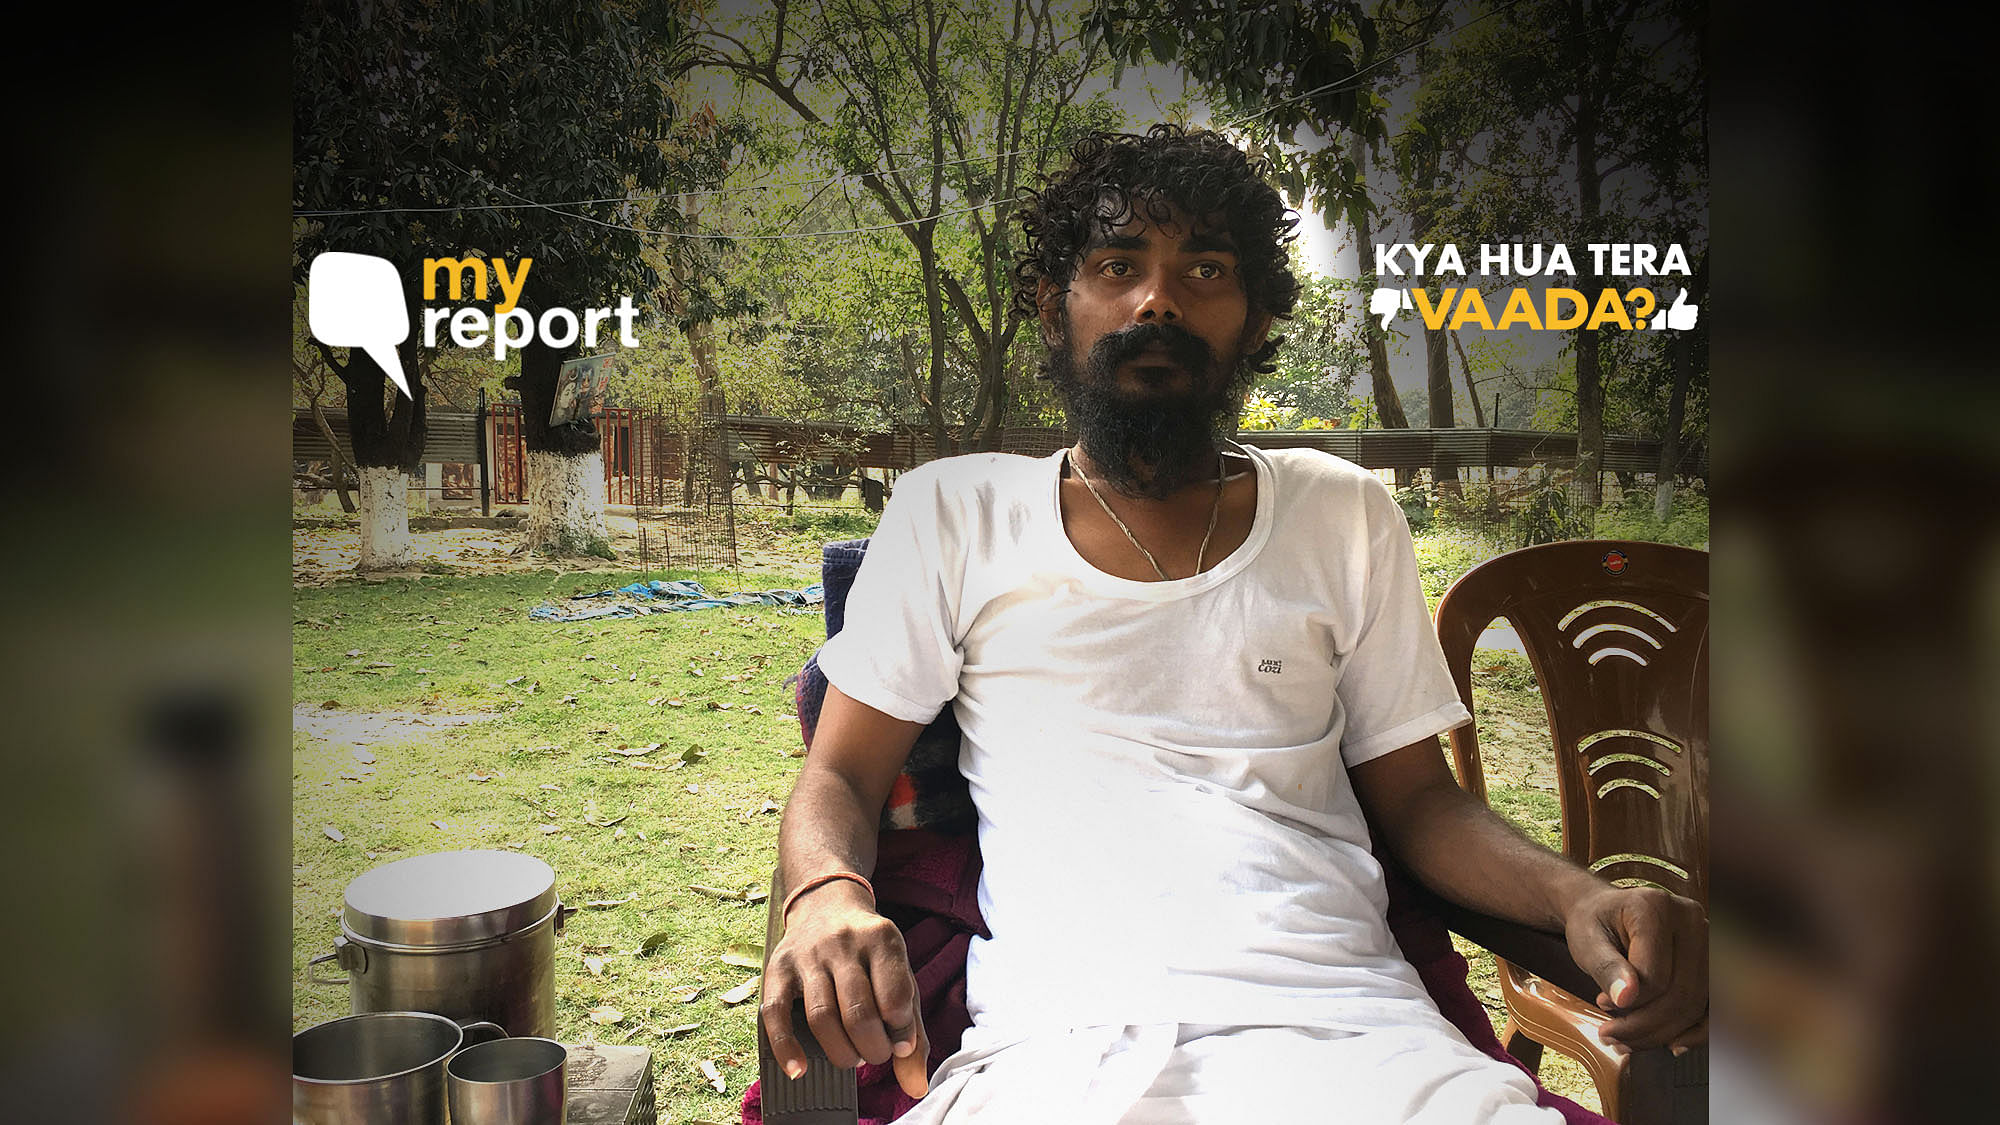 A 26-year-old Ganga activist Atmabodhanand has been fasting for over 155 days to protect river Ganga.